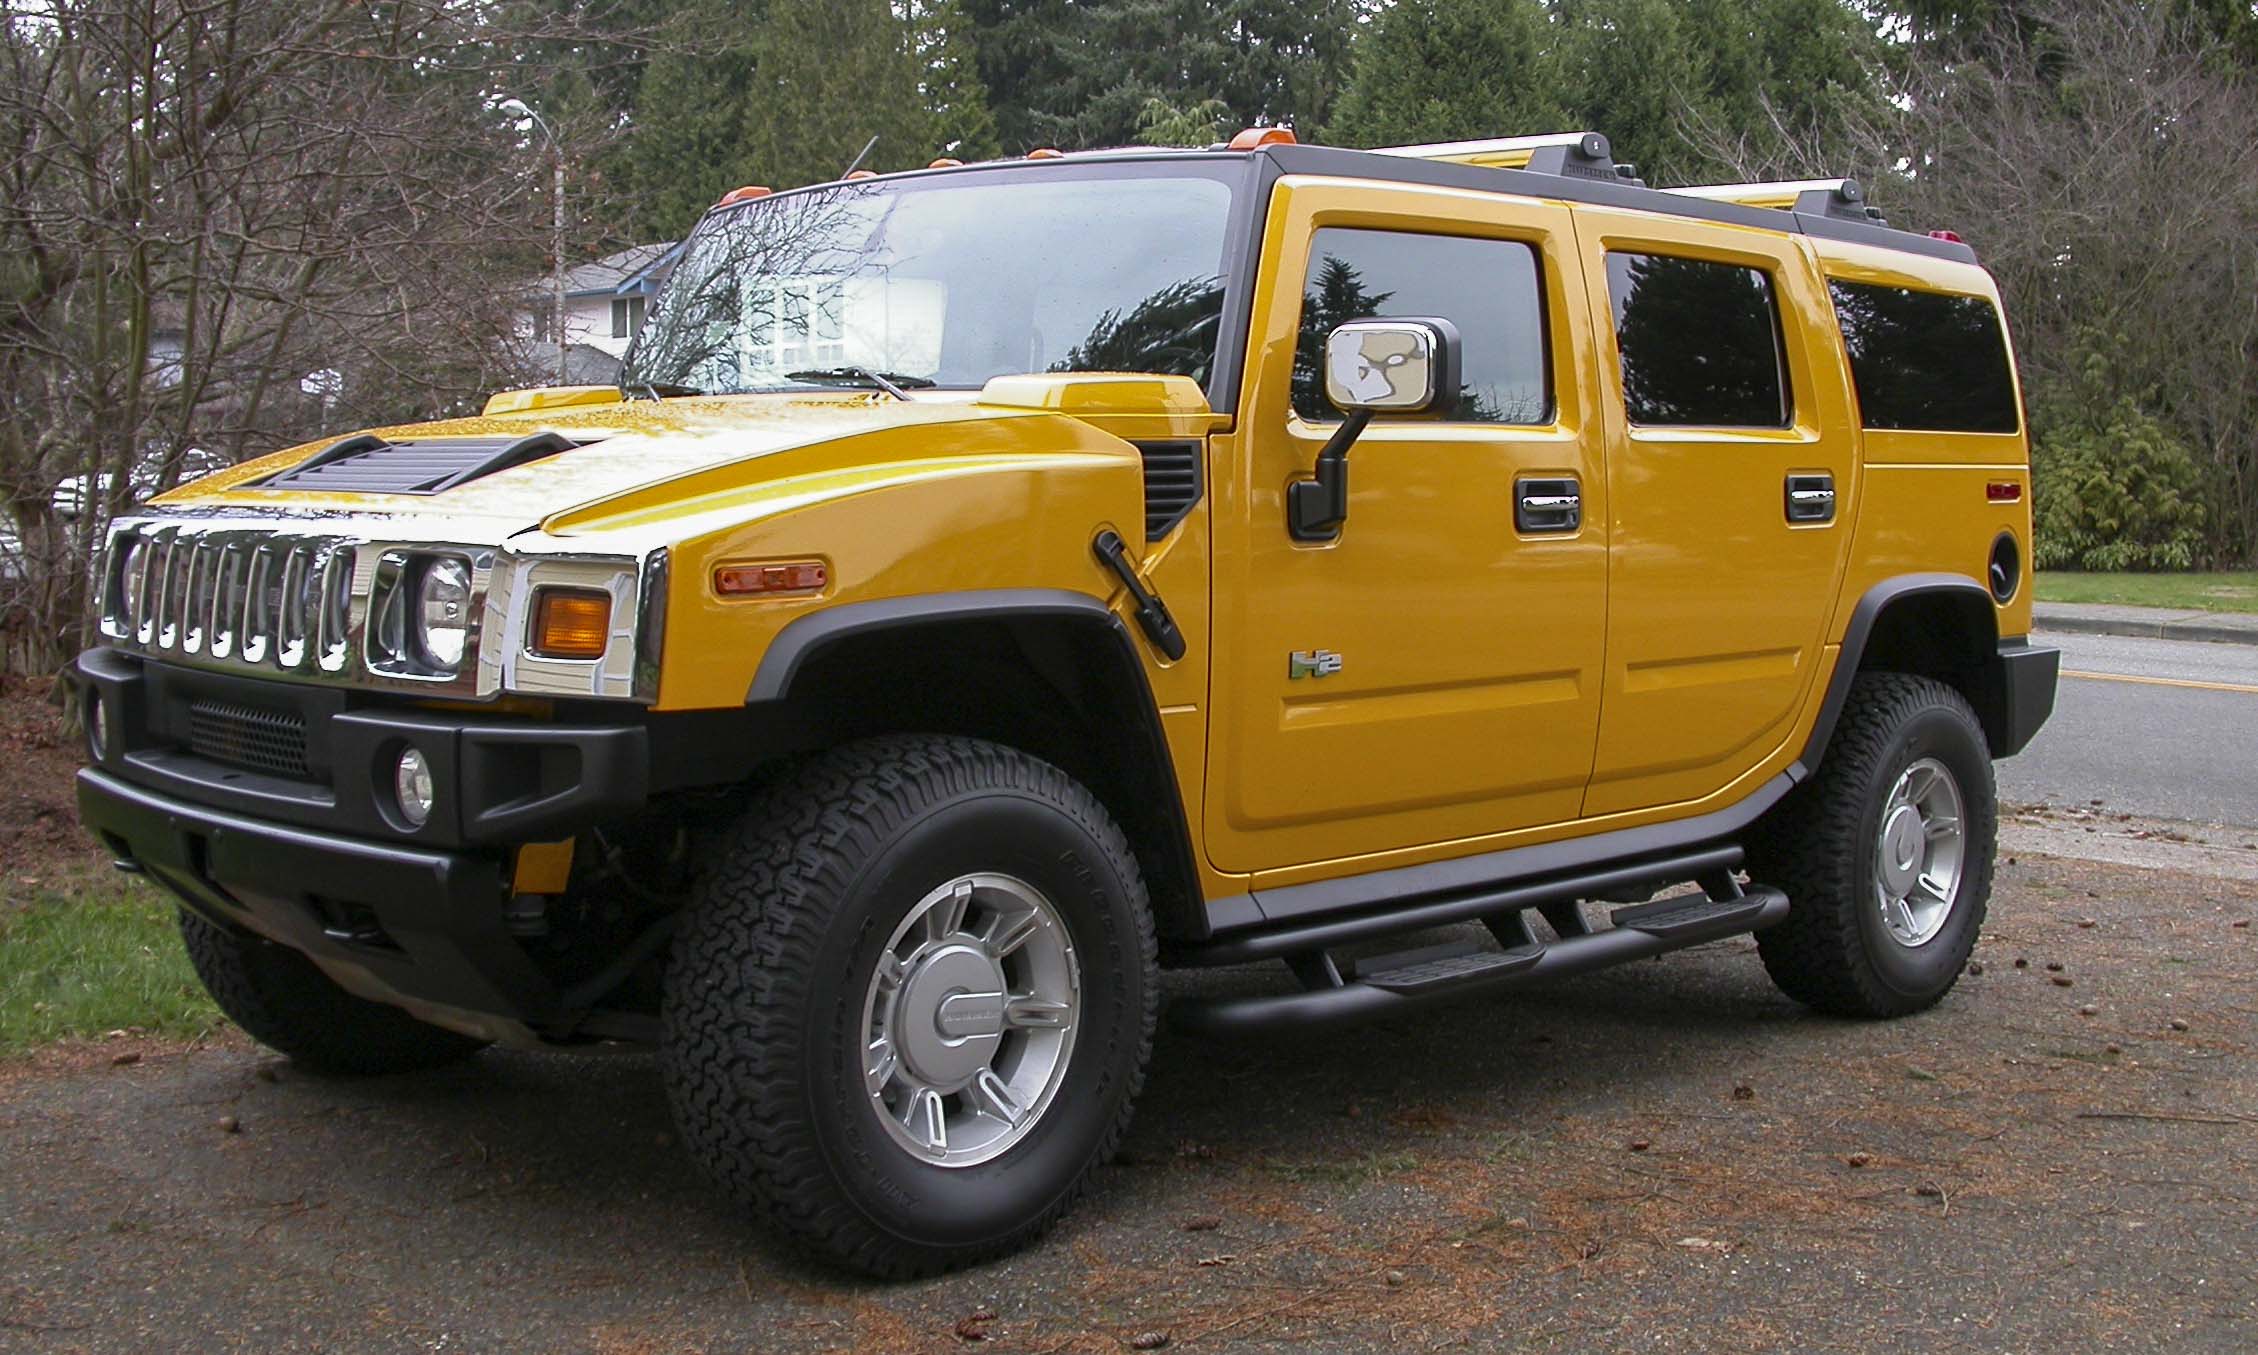 Rugged on a Budget: 4x4s Under $20,000